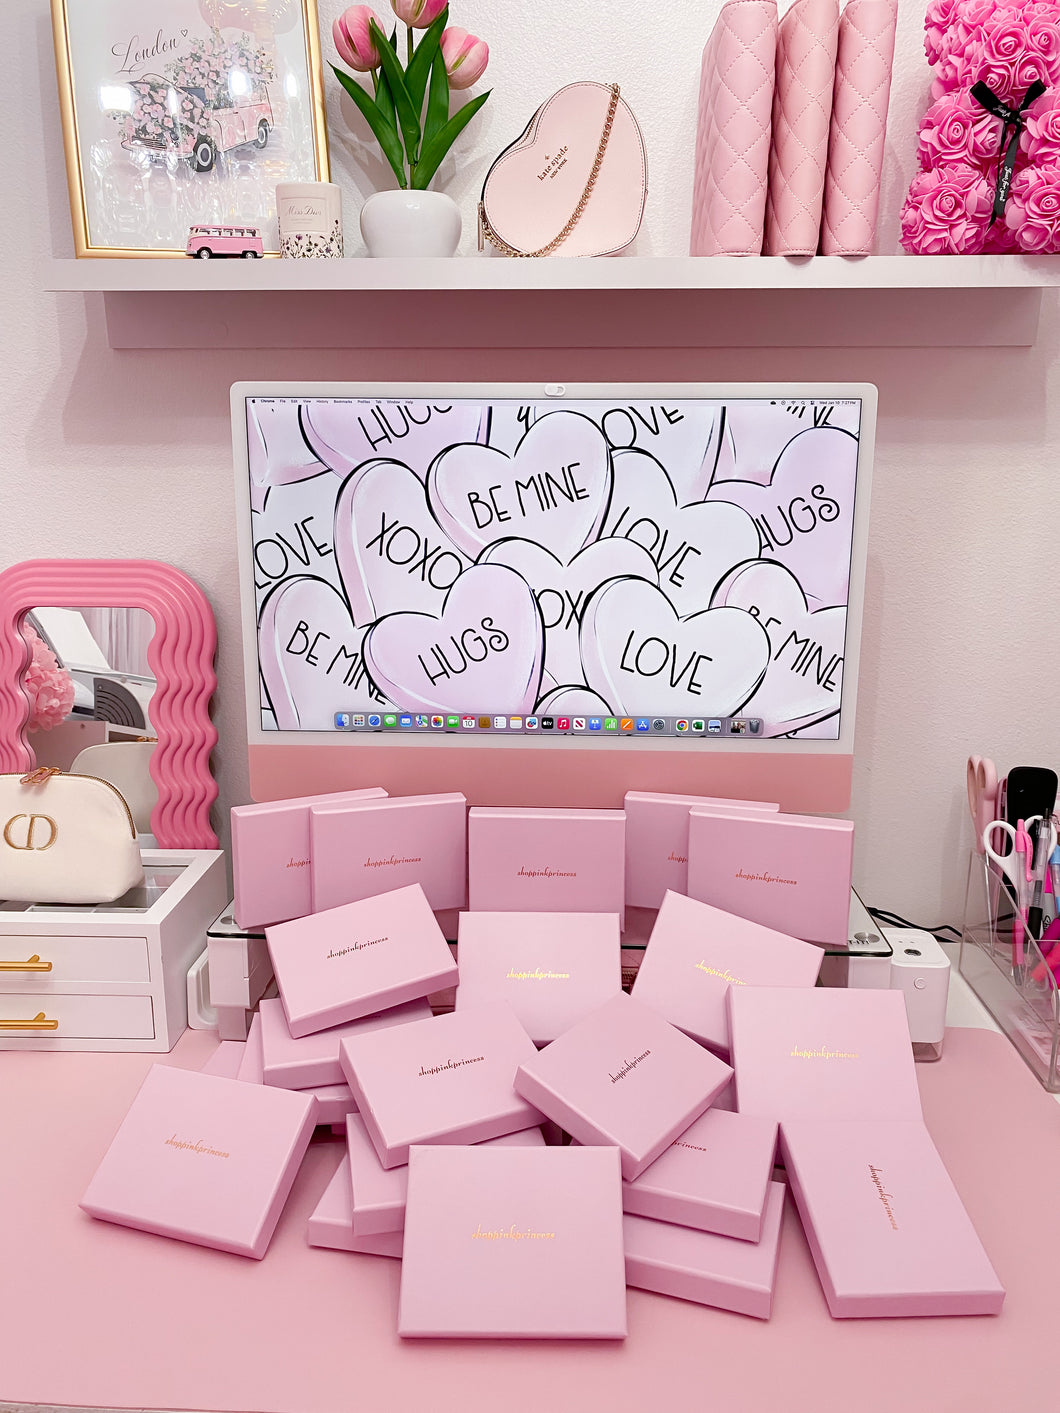 The Pink Princess Shop - All pink bedroomdreamy! 😍💕 #pink #pinklover  #pinkaesthetic